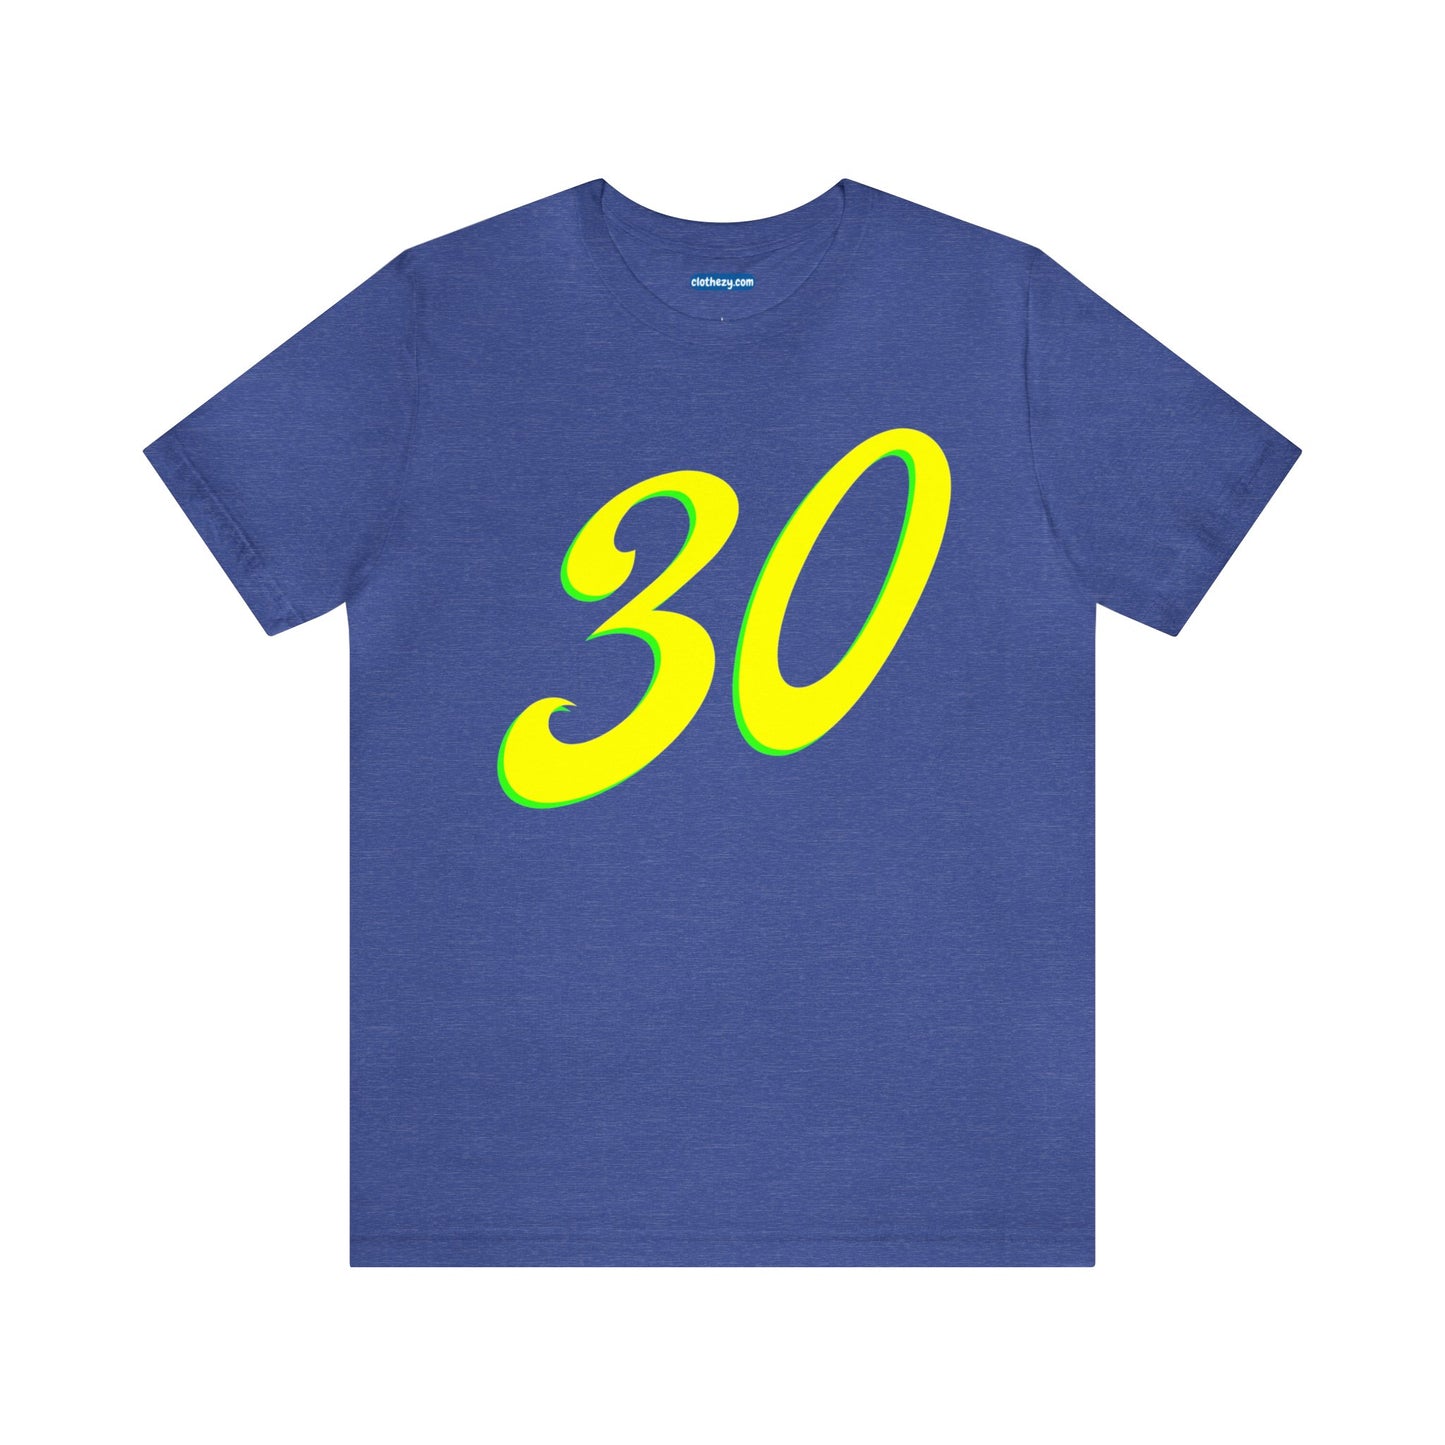 Number 30 Design - Soft Cotton Tee for birthdays and celebrations, Gift for friends and family, Multiple Options by clothezy.com in Royal Blue Heather Size Small - Buy Now